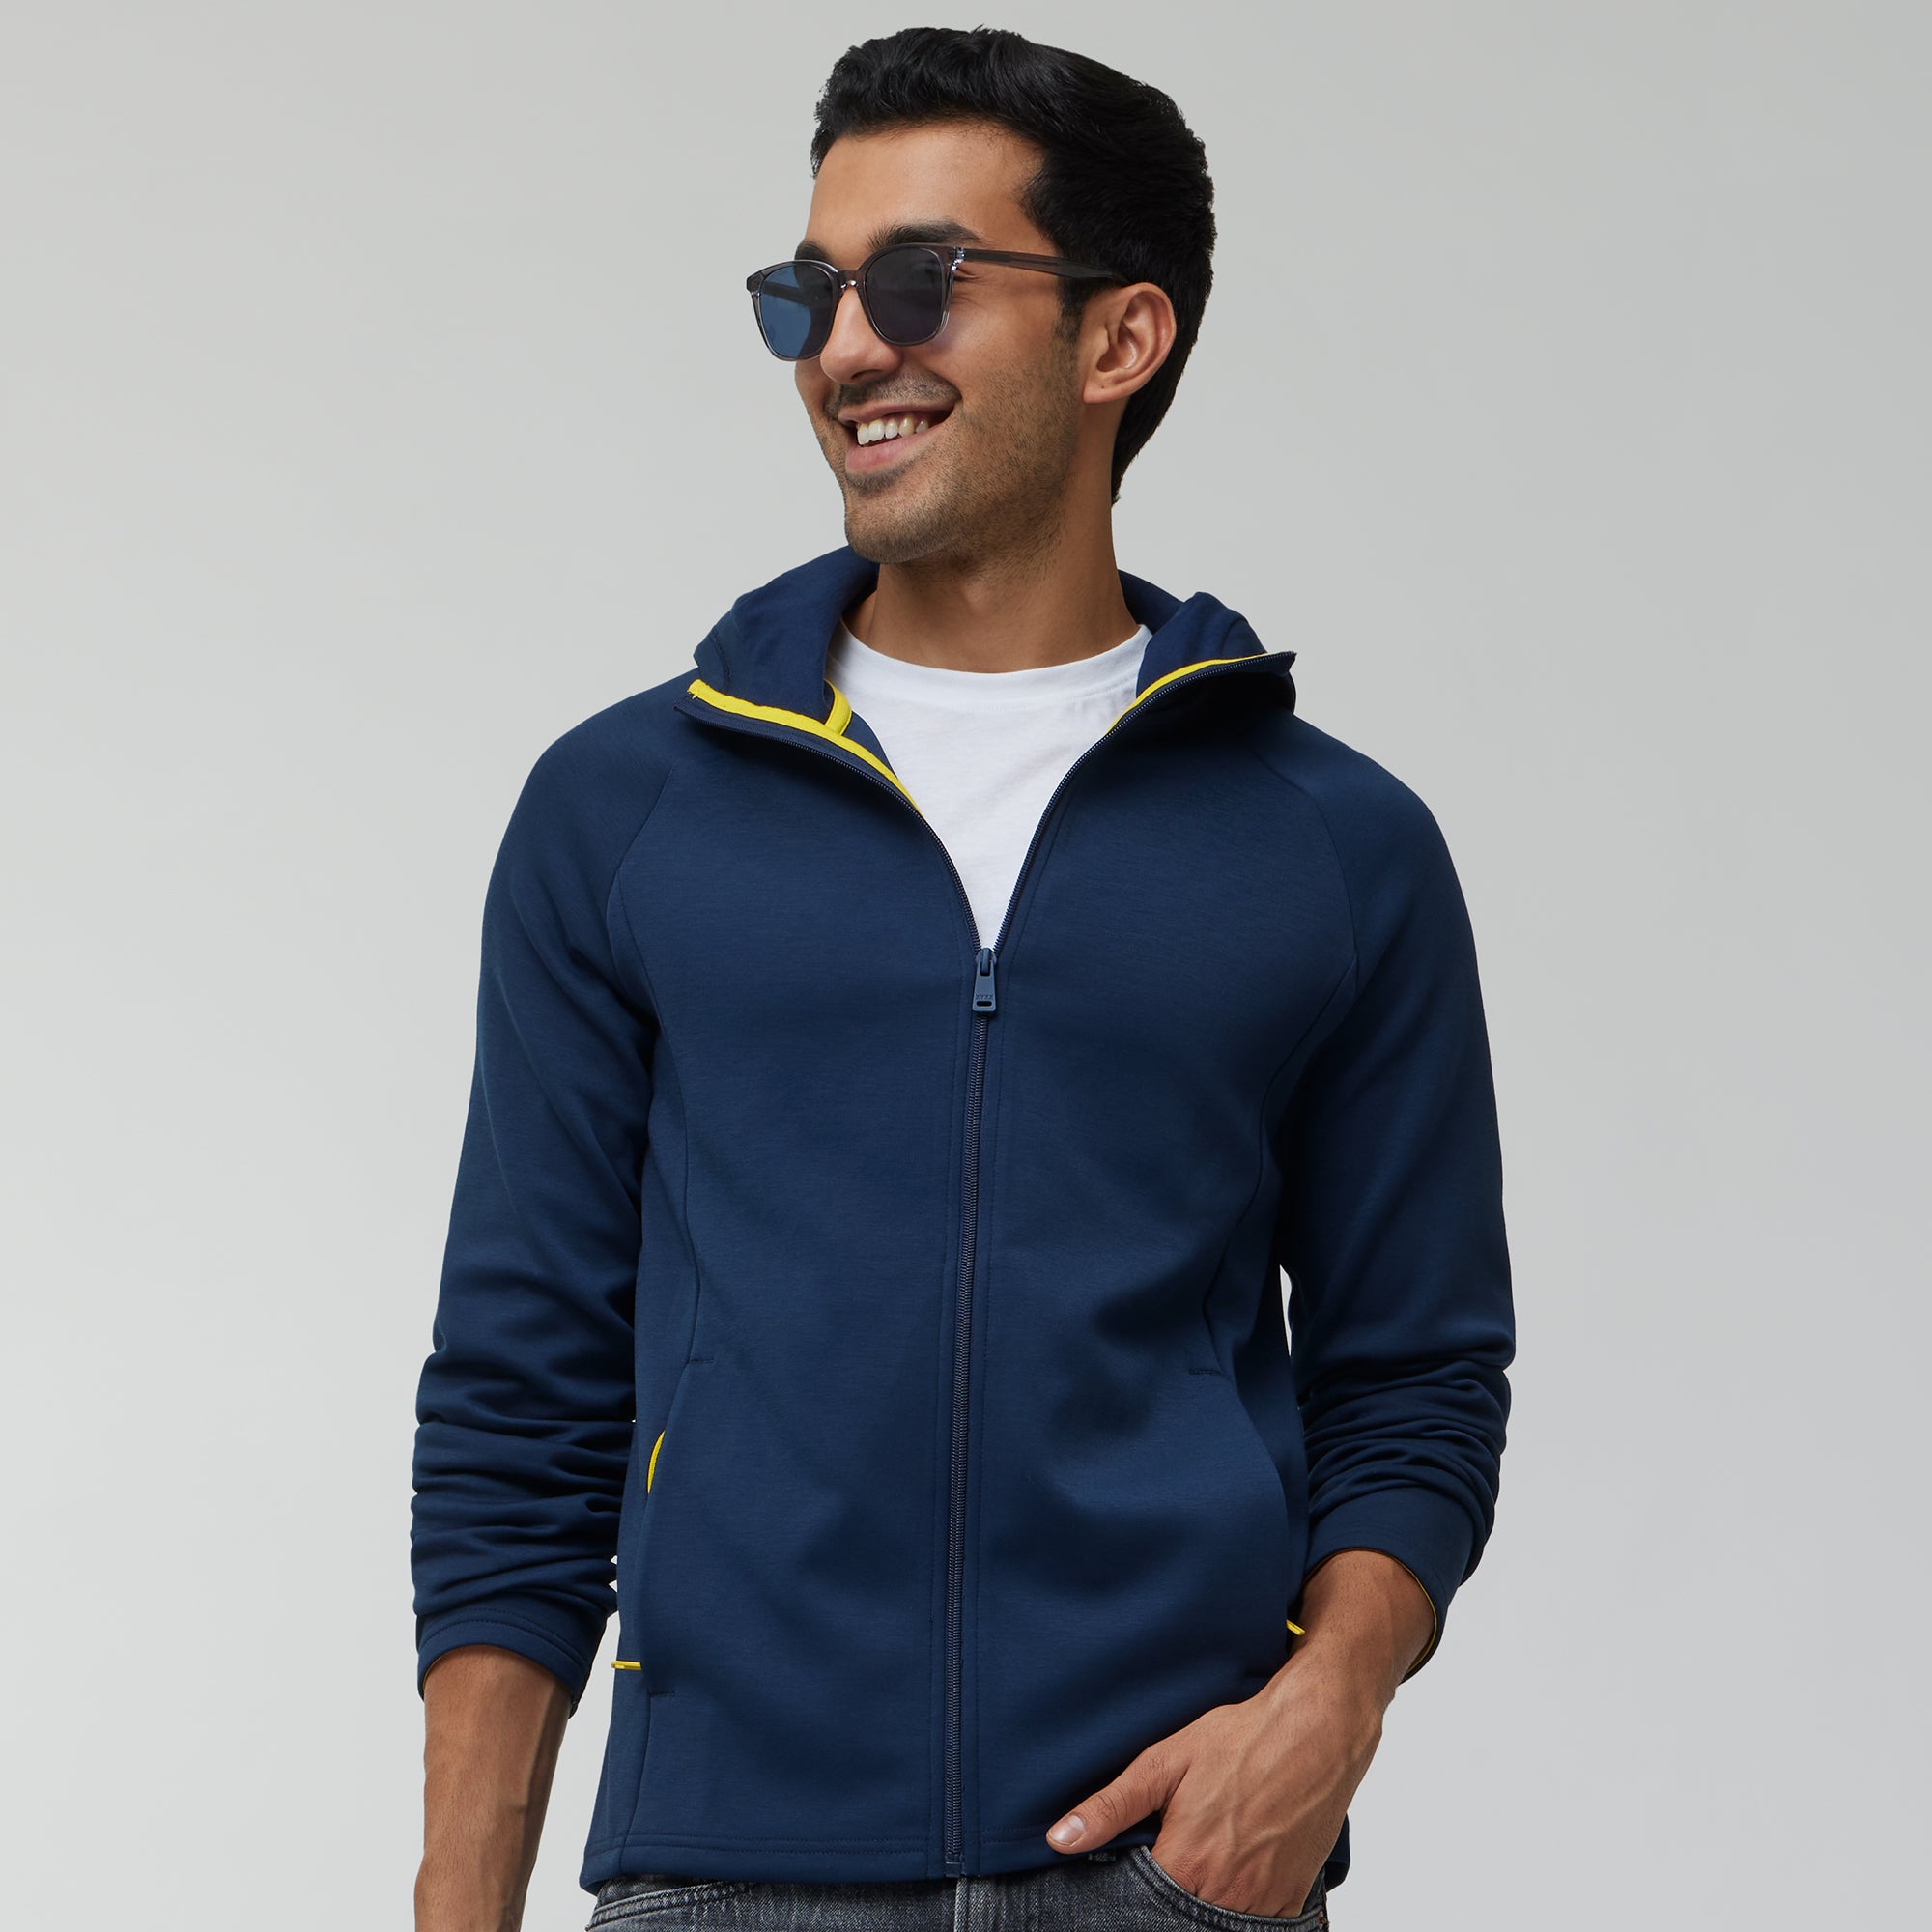 Mens Jackets and Hoodies